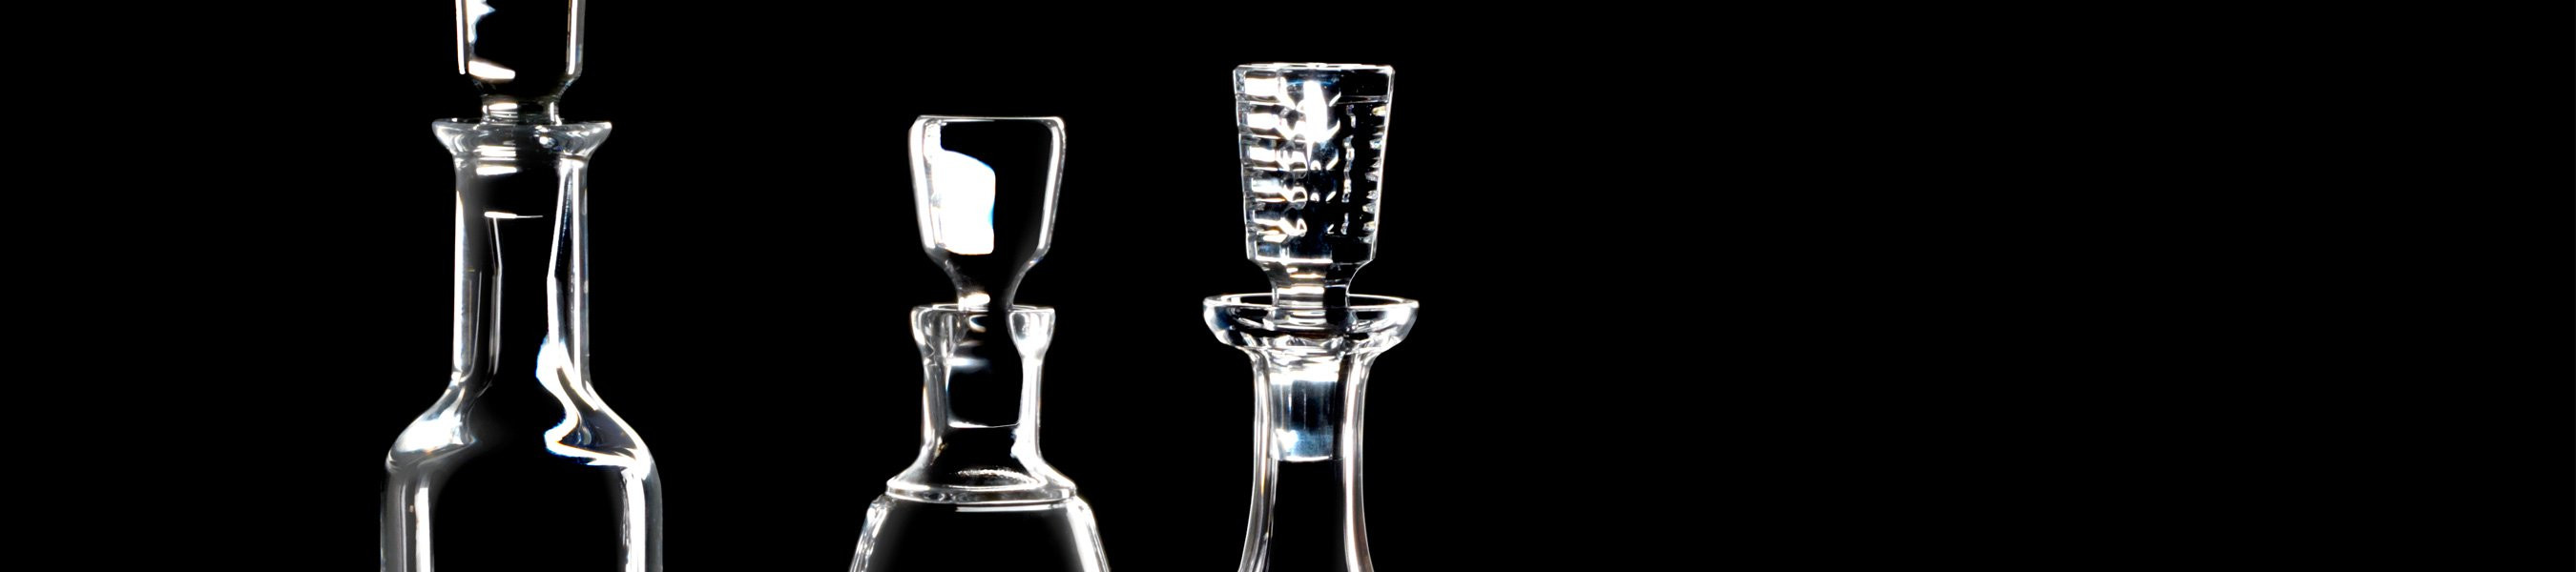 15 attractive Waterford Crystal Lismore Vase 8 2024 free download waterford crystal lismore vase 8 of crystal decanters pitchers carafes waterforda us with regard to waterford crystal decanters pitchers carafes